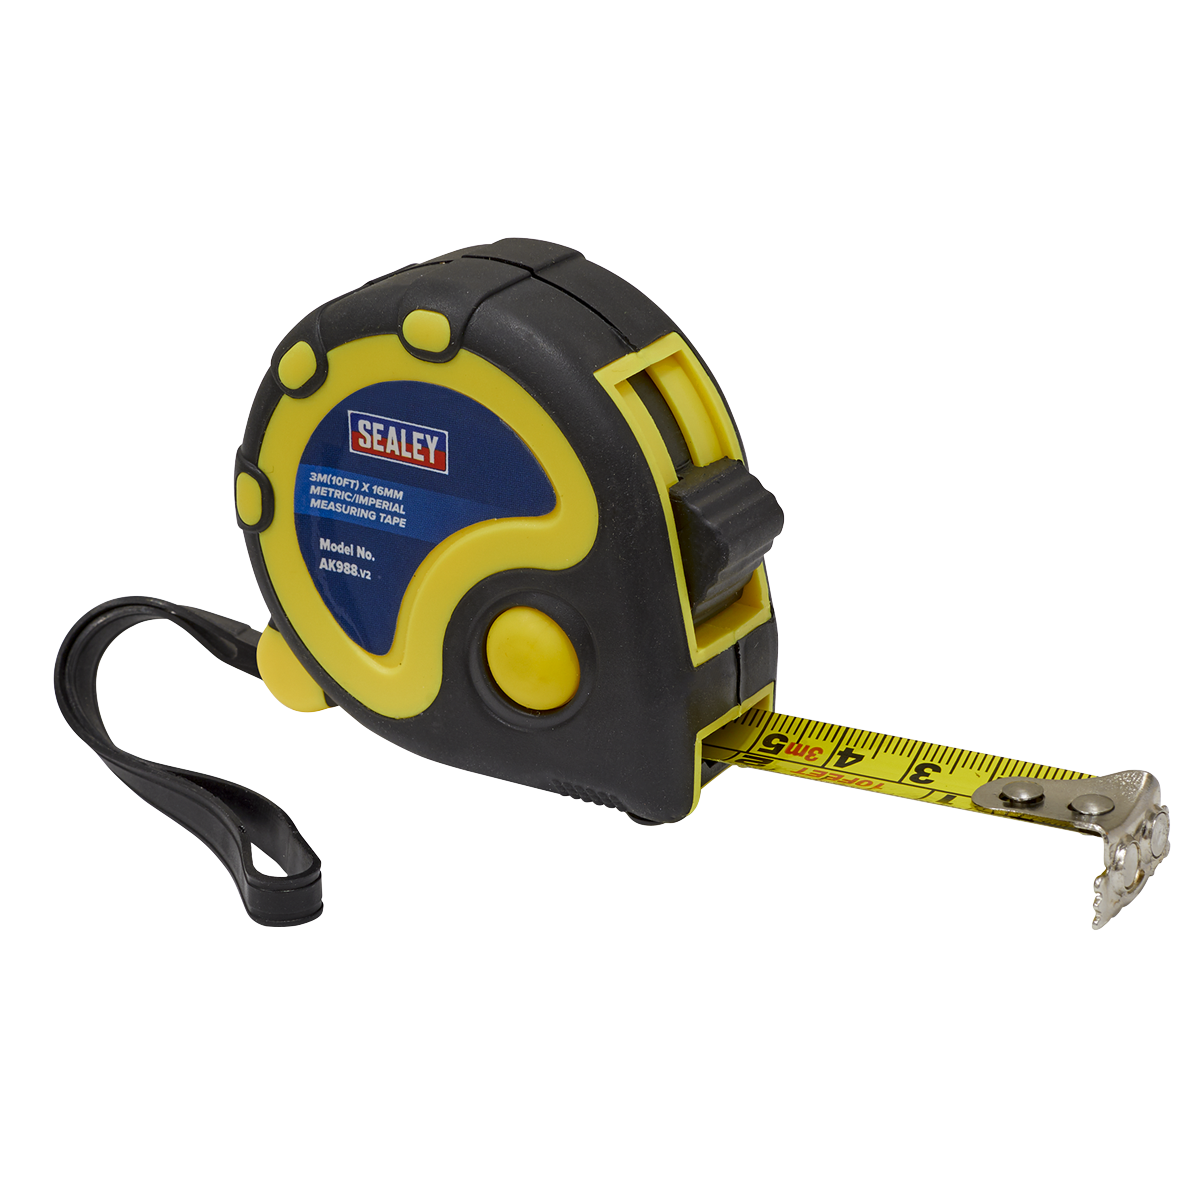 Rubber Tape Measure 3m(10ft) x 16mm - Metric/Imperial